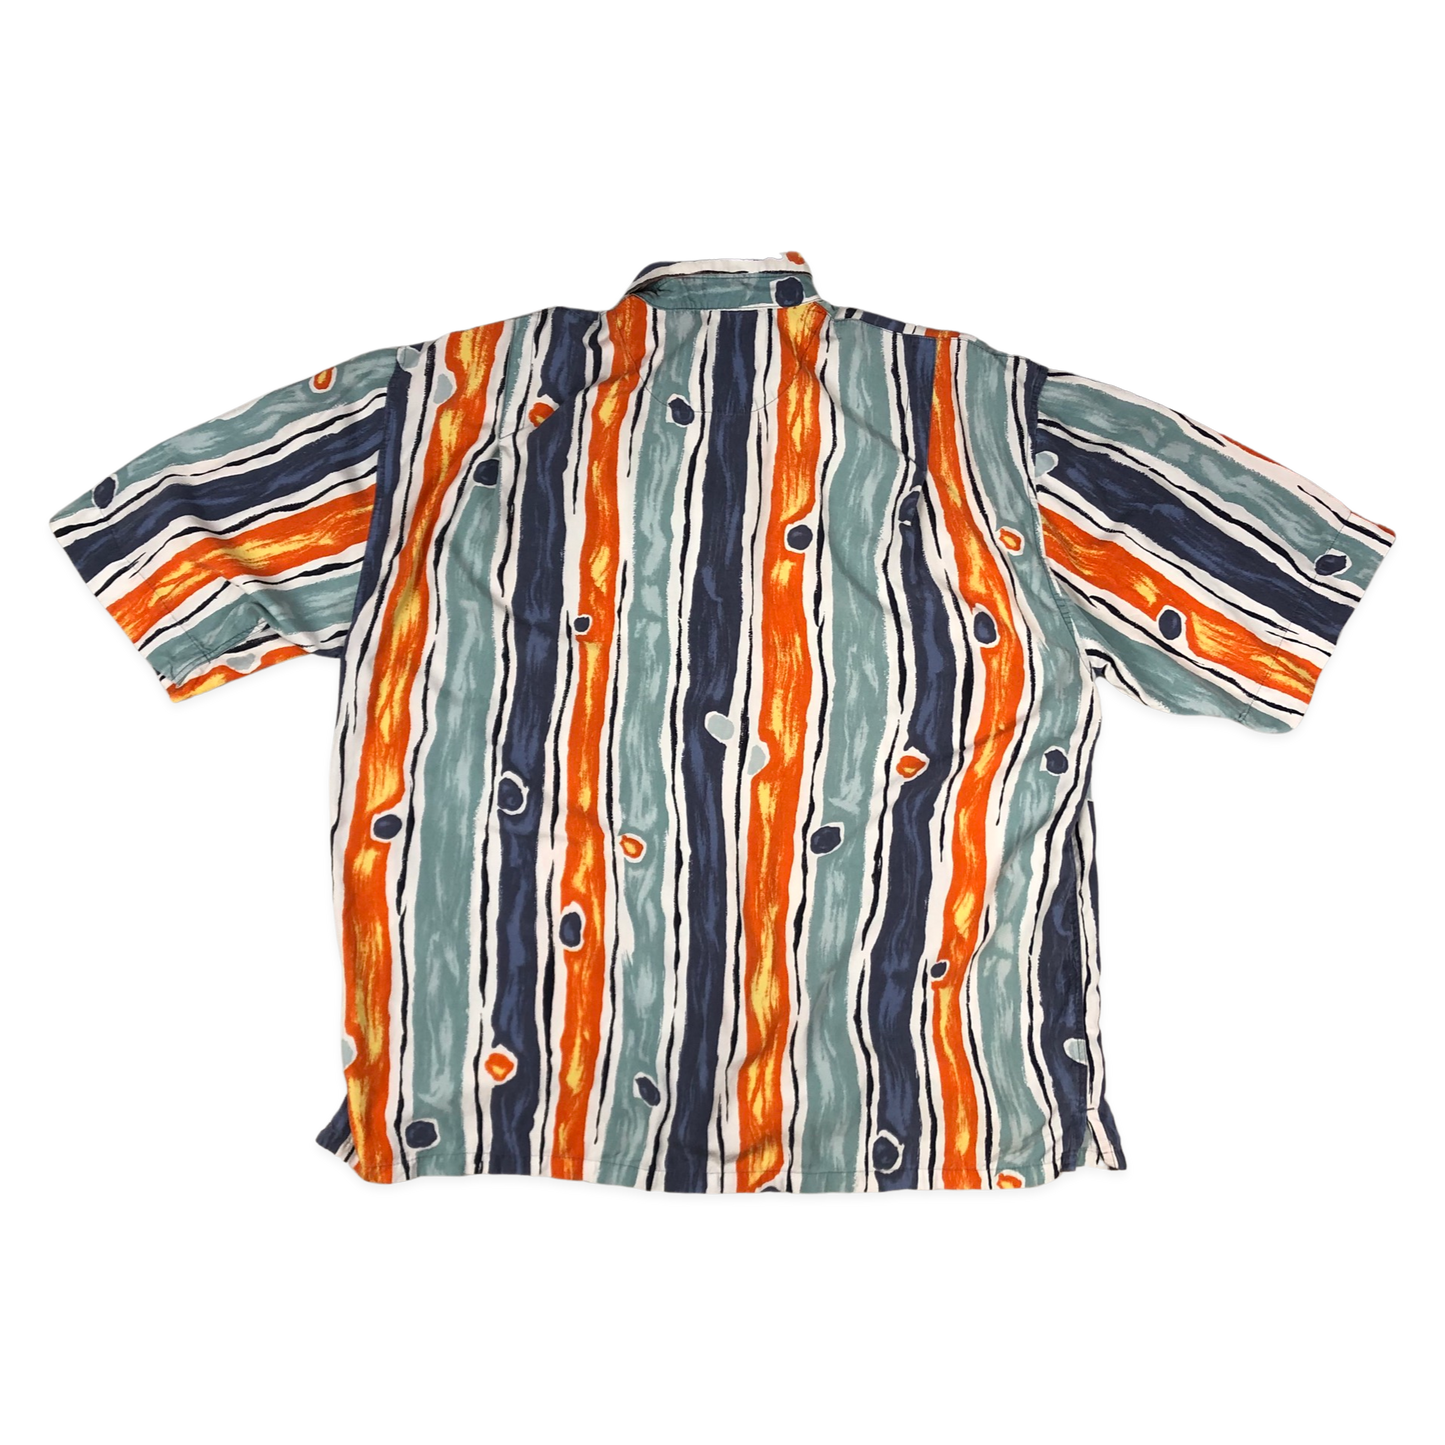 Vintage 90s Abstract Print Orange, White, and Blue Shirt 3XL